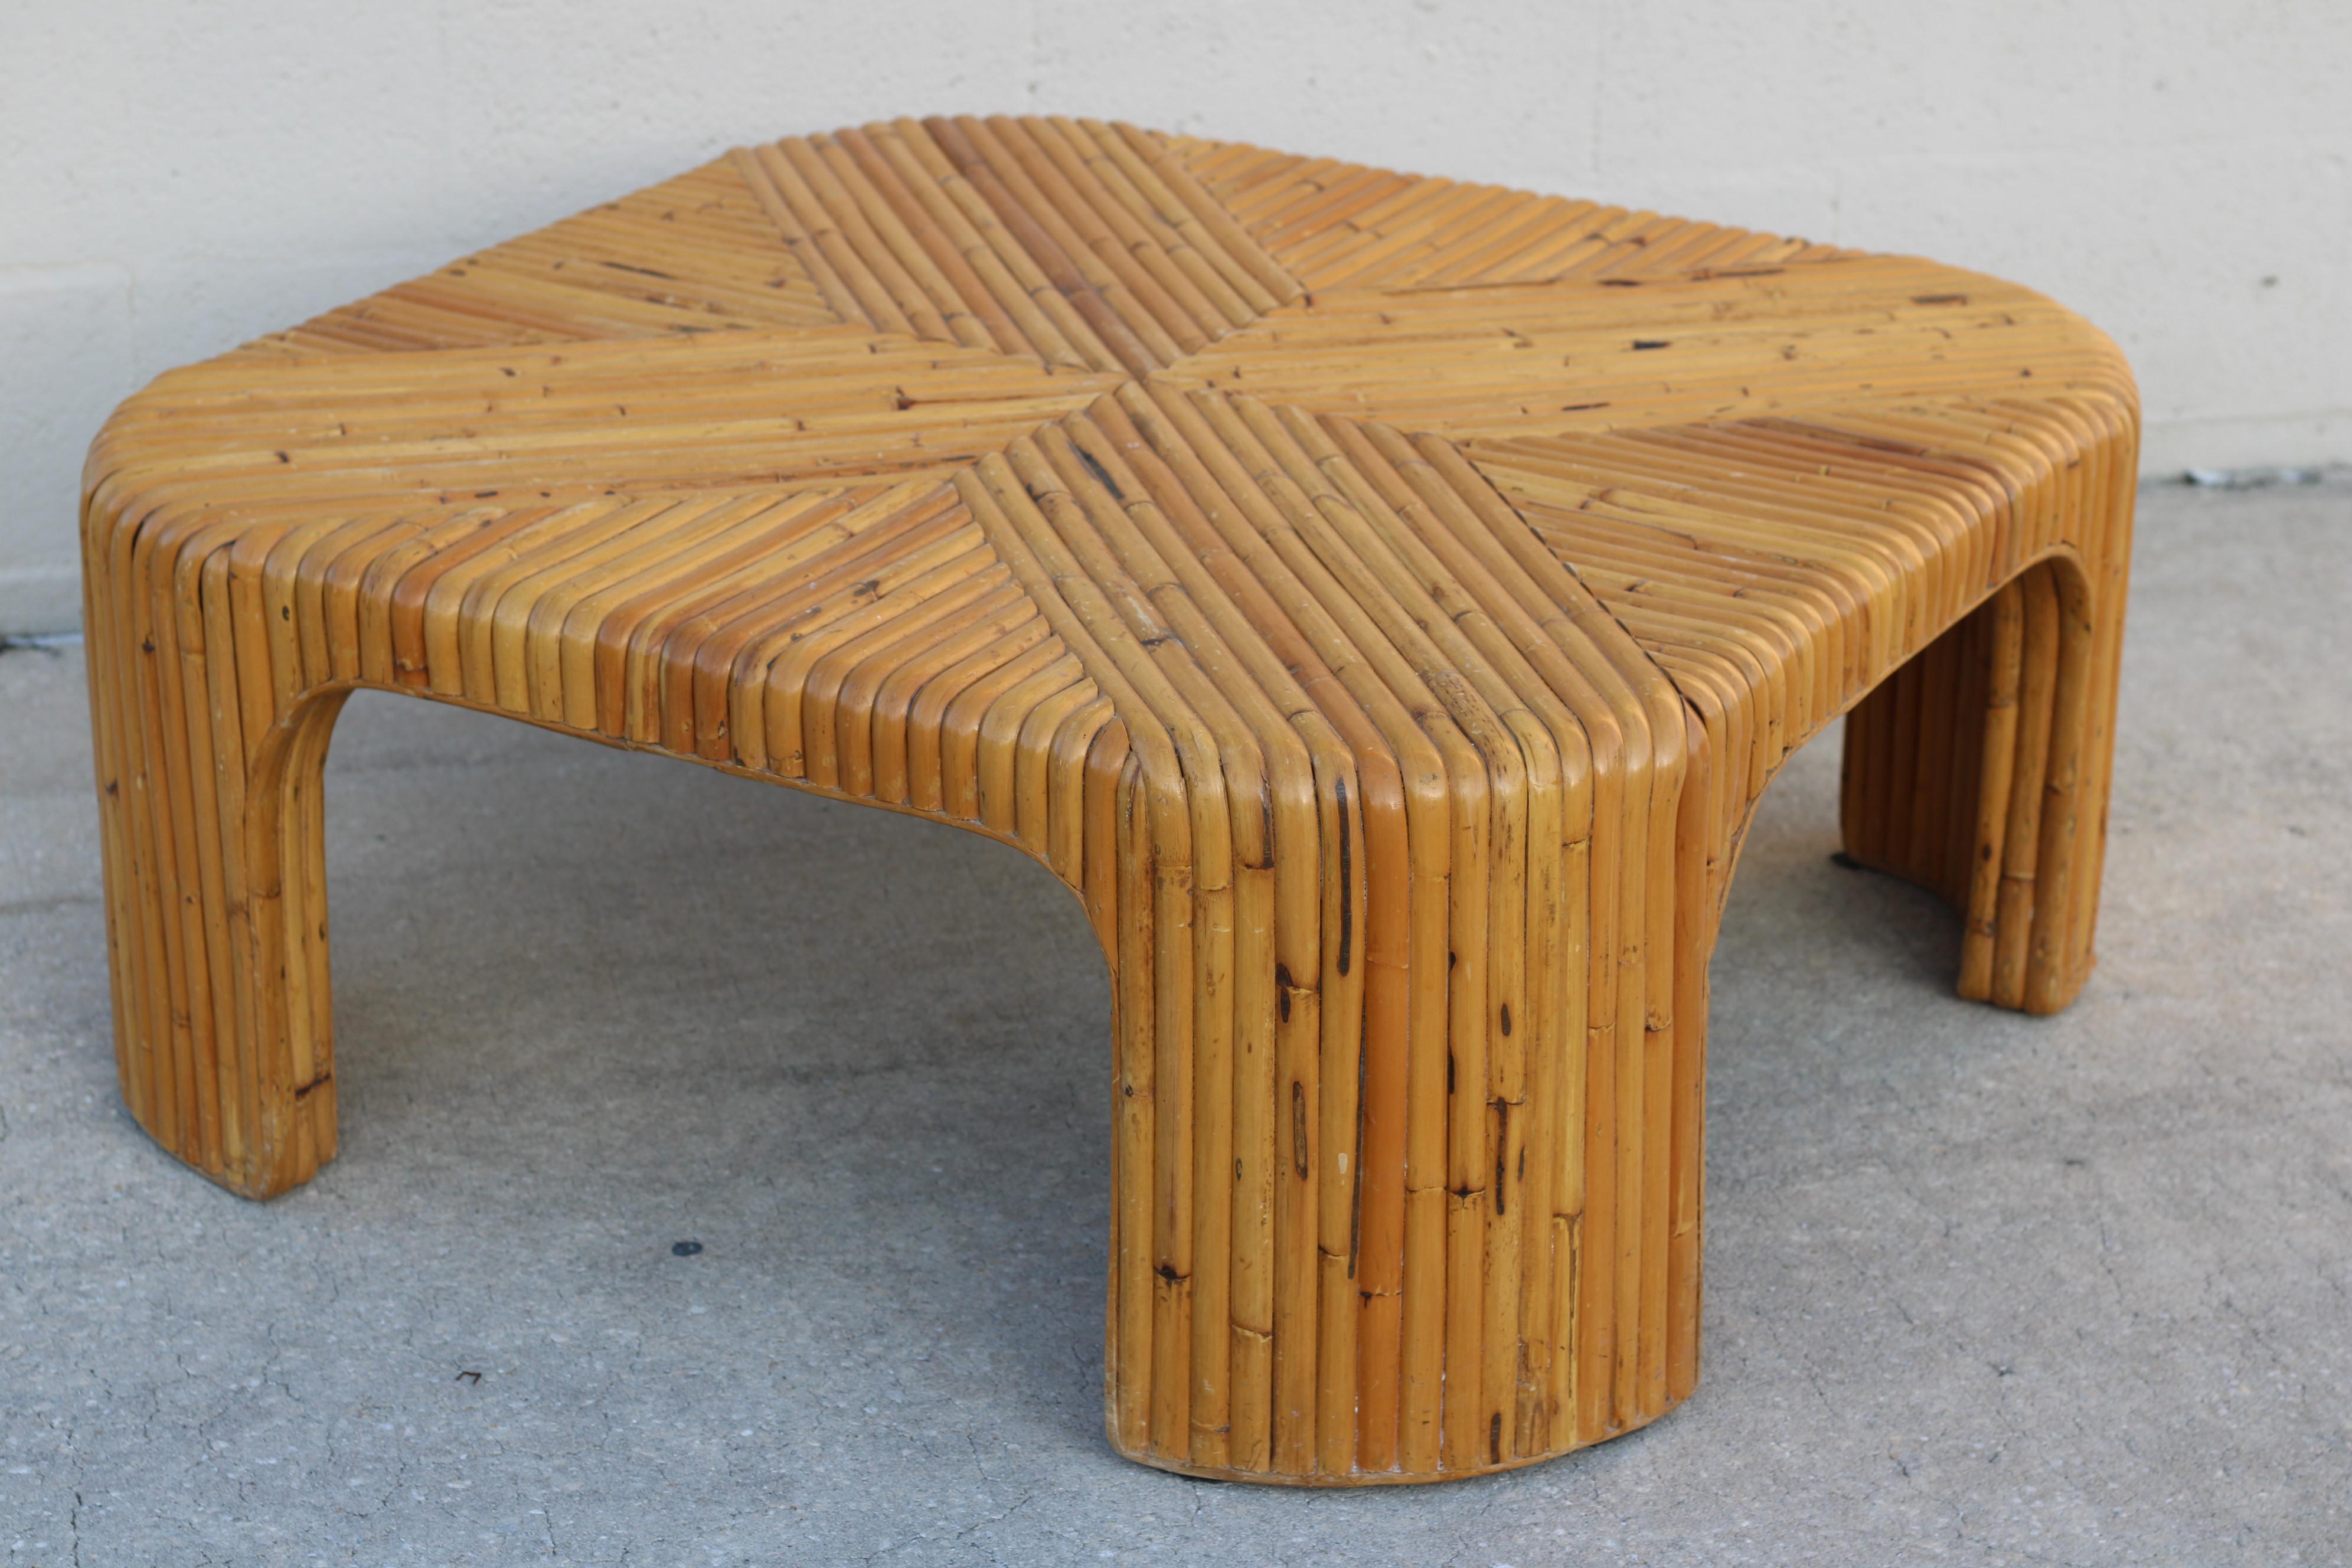 Vintage organic modern split bamboo coffee table with a distinctive geometric pattern, circa 1970s. Expertly made in the Philippines, this sturdy table is a beautiful and useful piece that will anchor a room while introducing warmth and